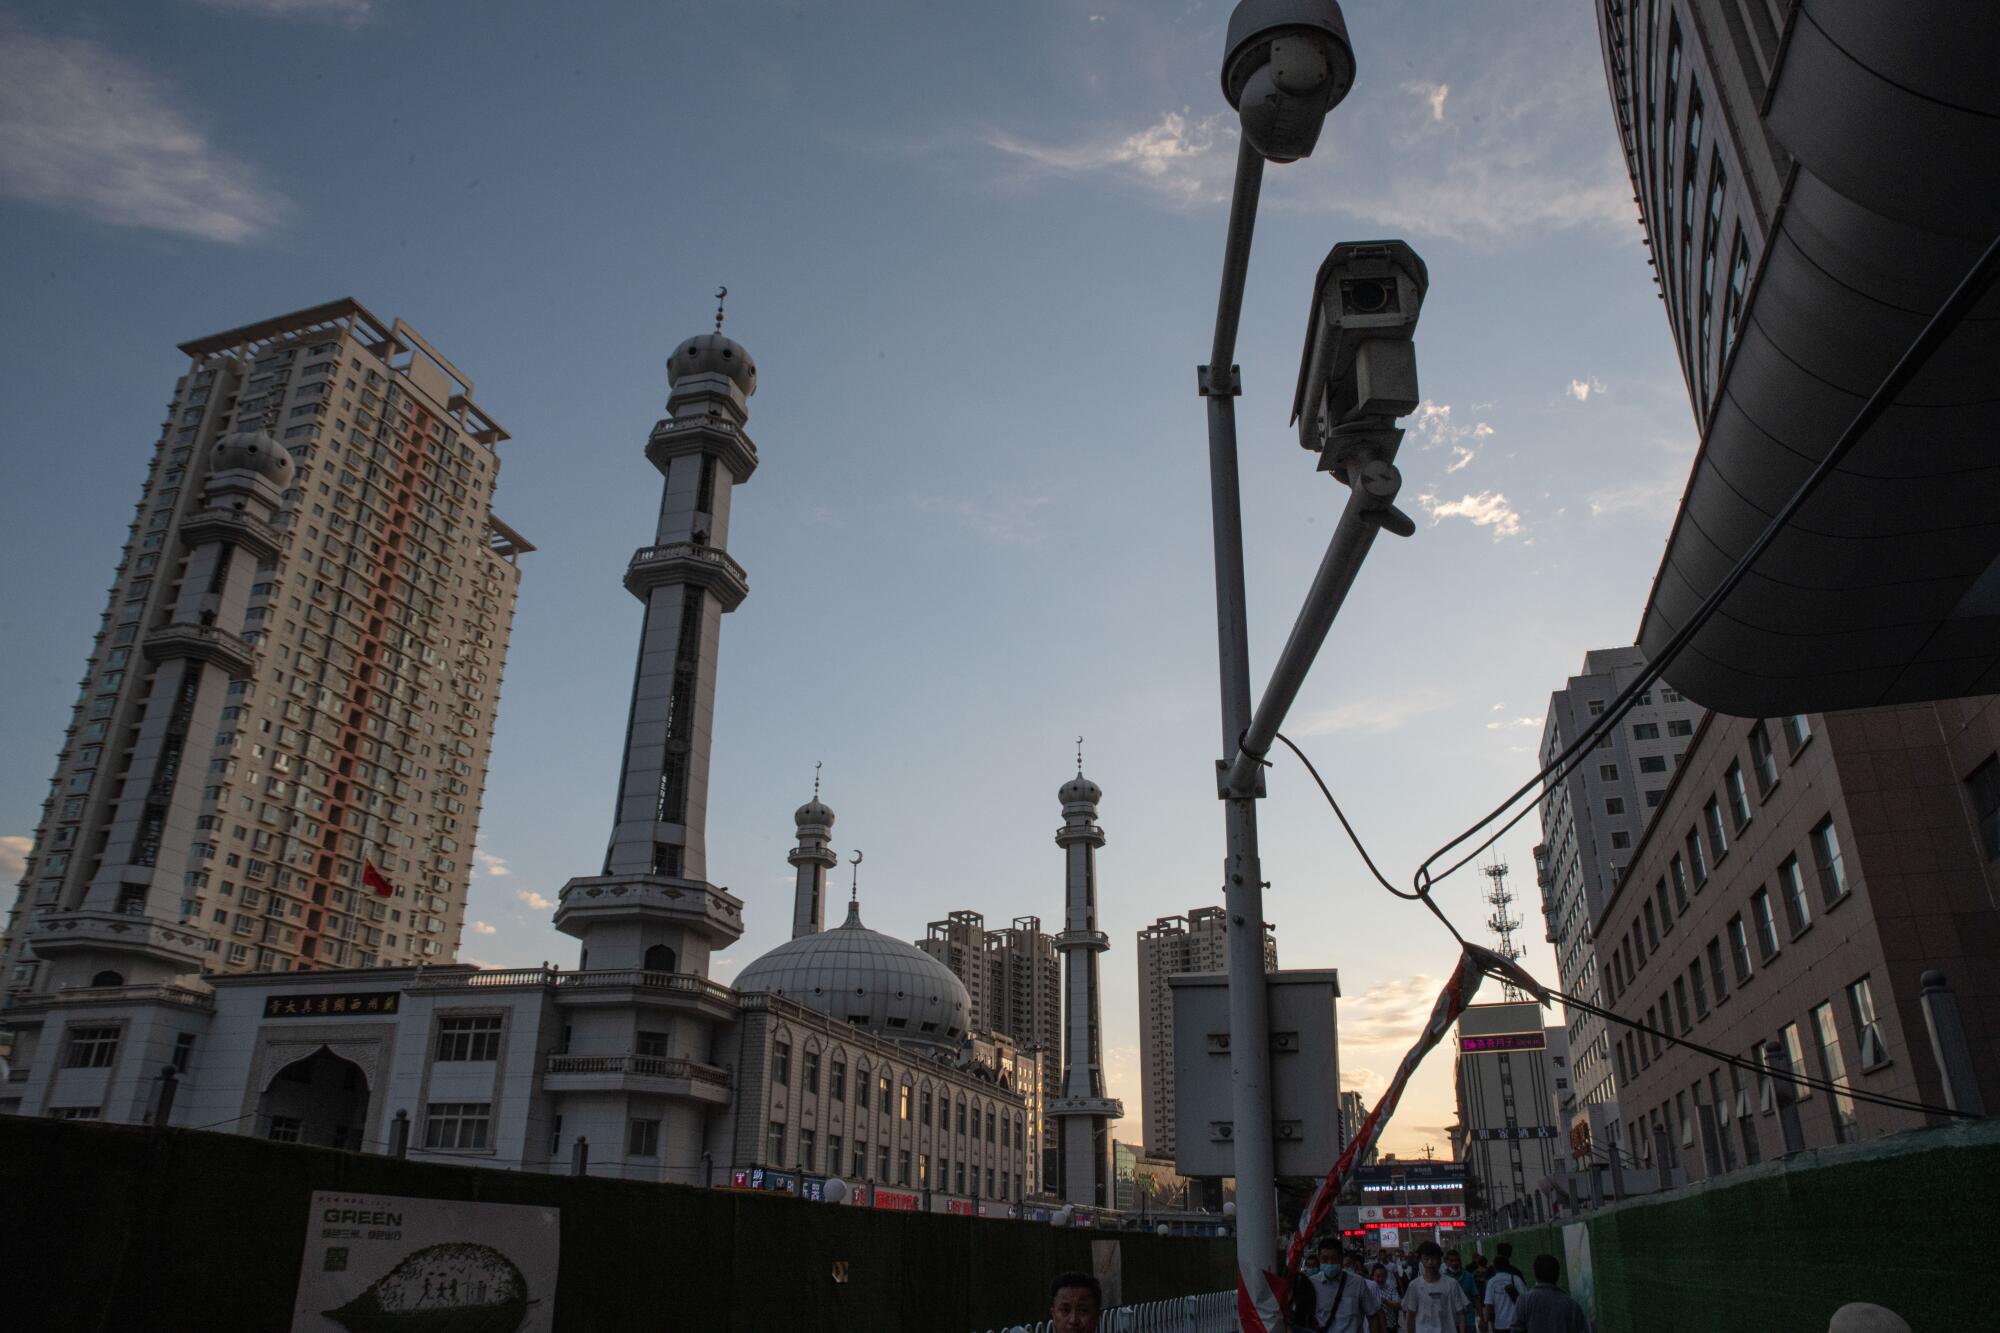 A camera mounted on a pole is aimed at a mosque with a dome and four minarets that sits amid other tall buildings 